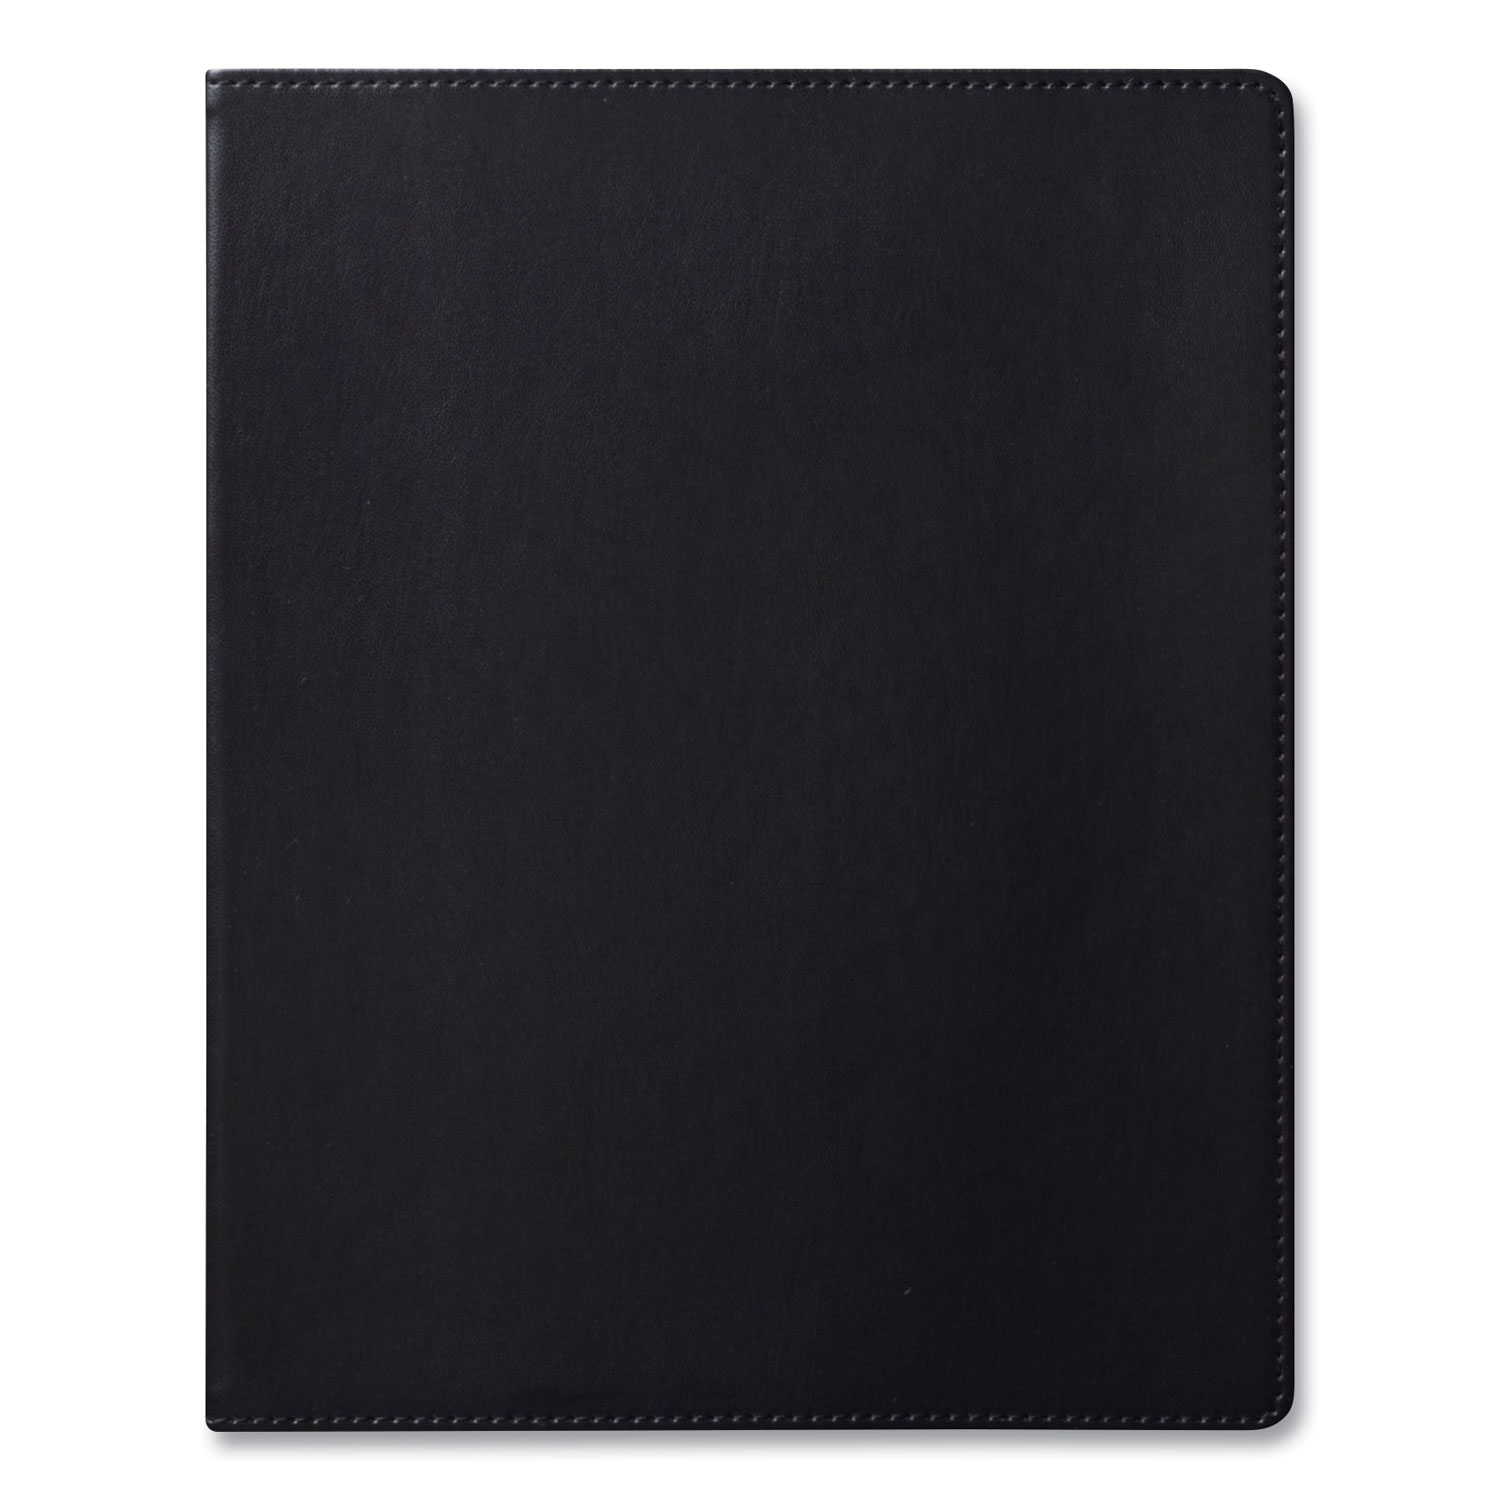  Eccolo D521N Simple Faux Leather Journal, Black, 8 x 10, 256 Ivory Pages (ECK865886) 